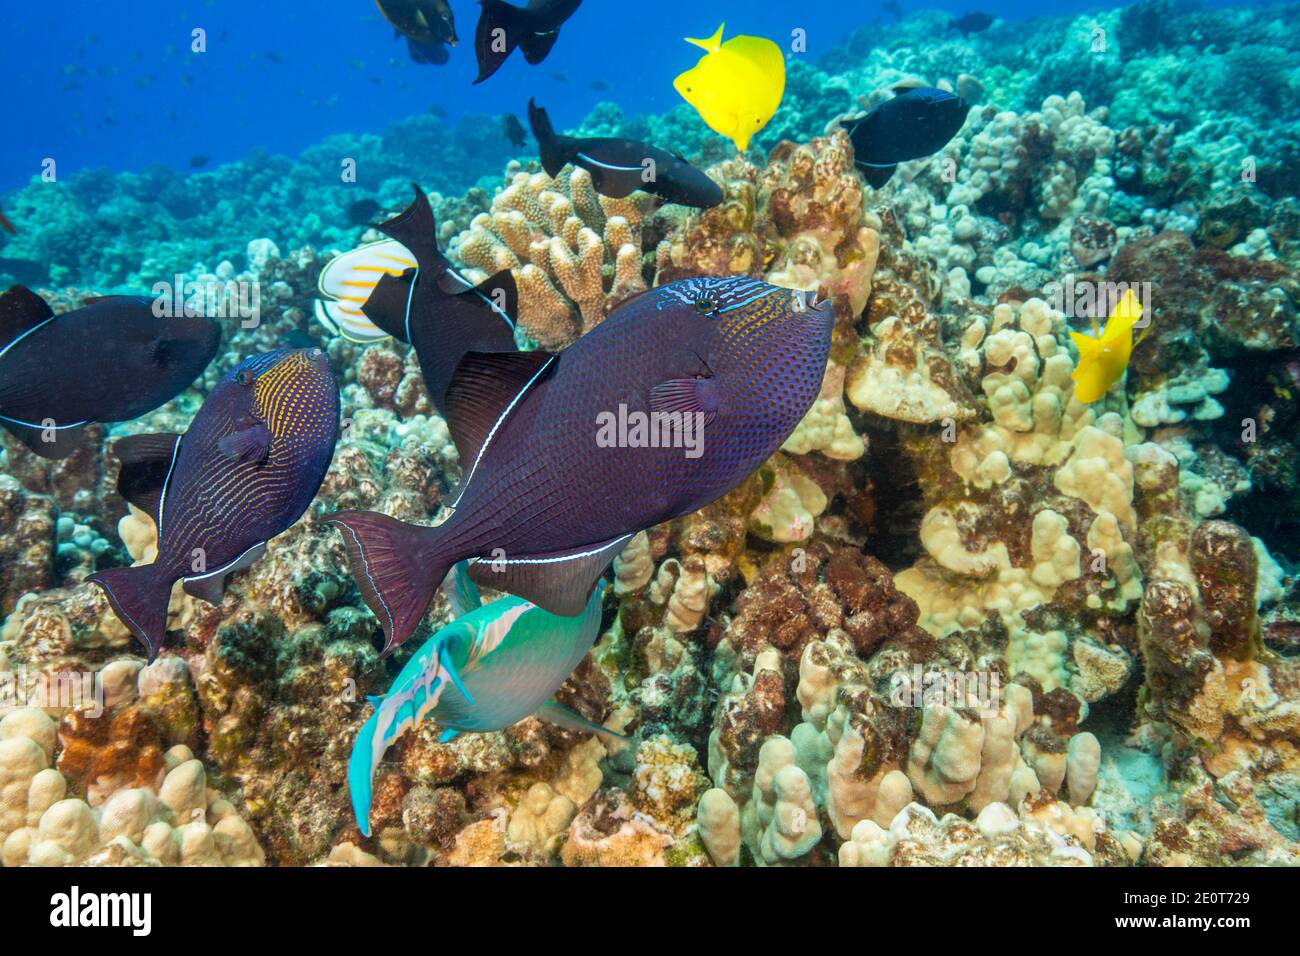 Black triggerfish, Melichthys niger, are often found in large schools over reef areas.  They are also known as black durgon, Hawaii. Stock Photo